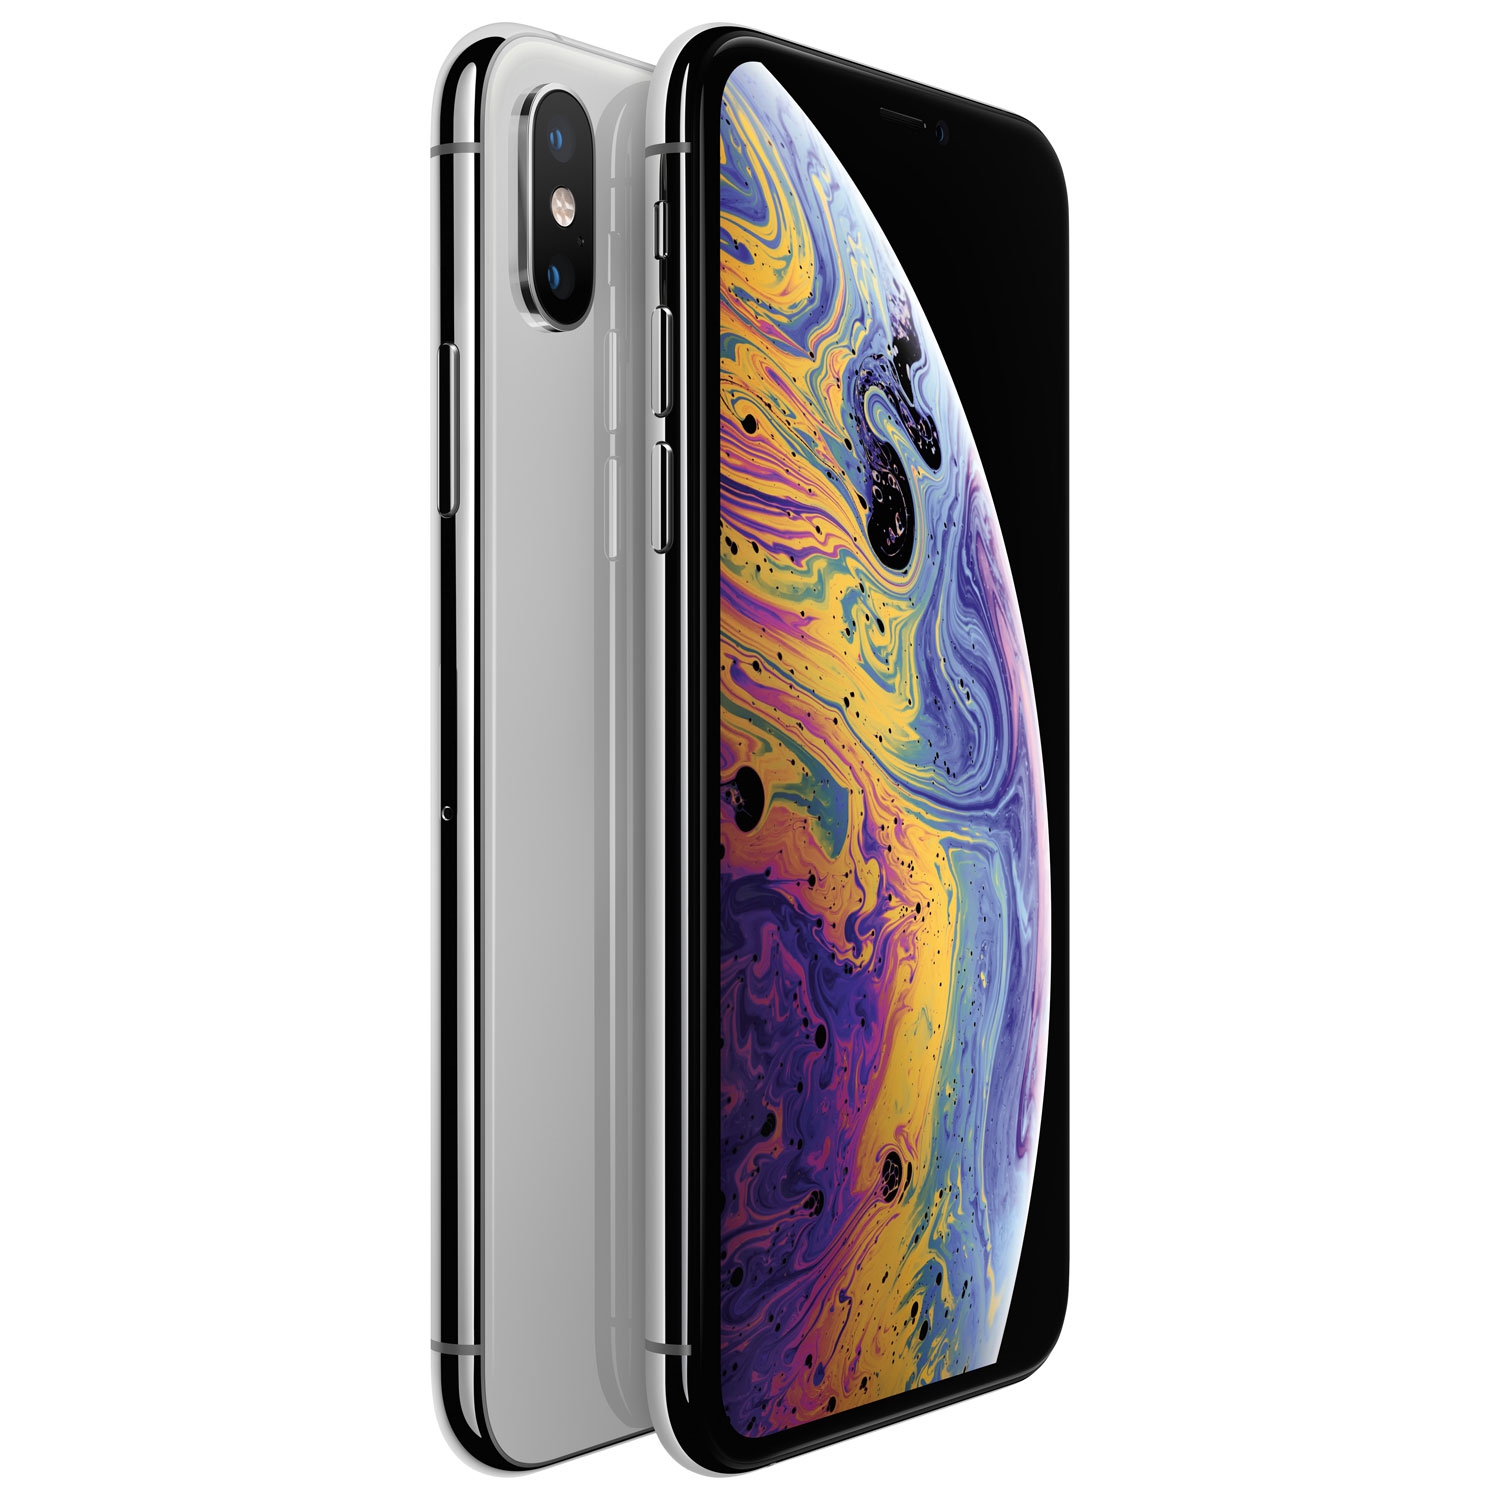 Refurbished (Excellent) - Apple iPhone XS Max 256GB Smartphone - Silver - Unlocked - Certified Refurbished